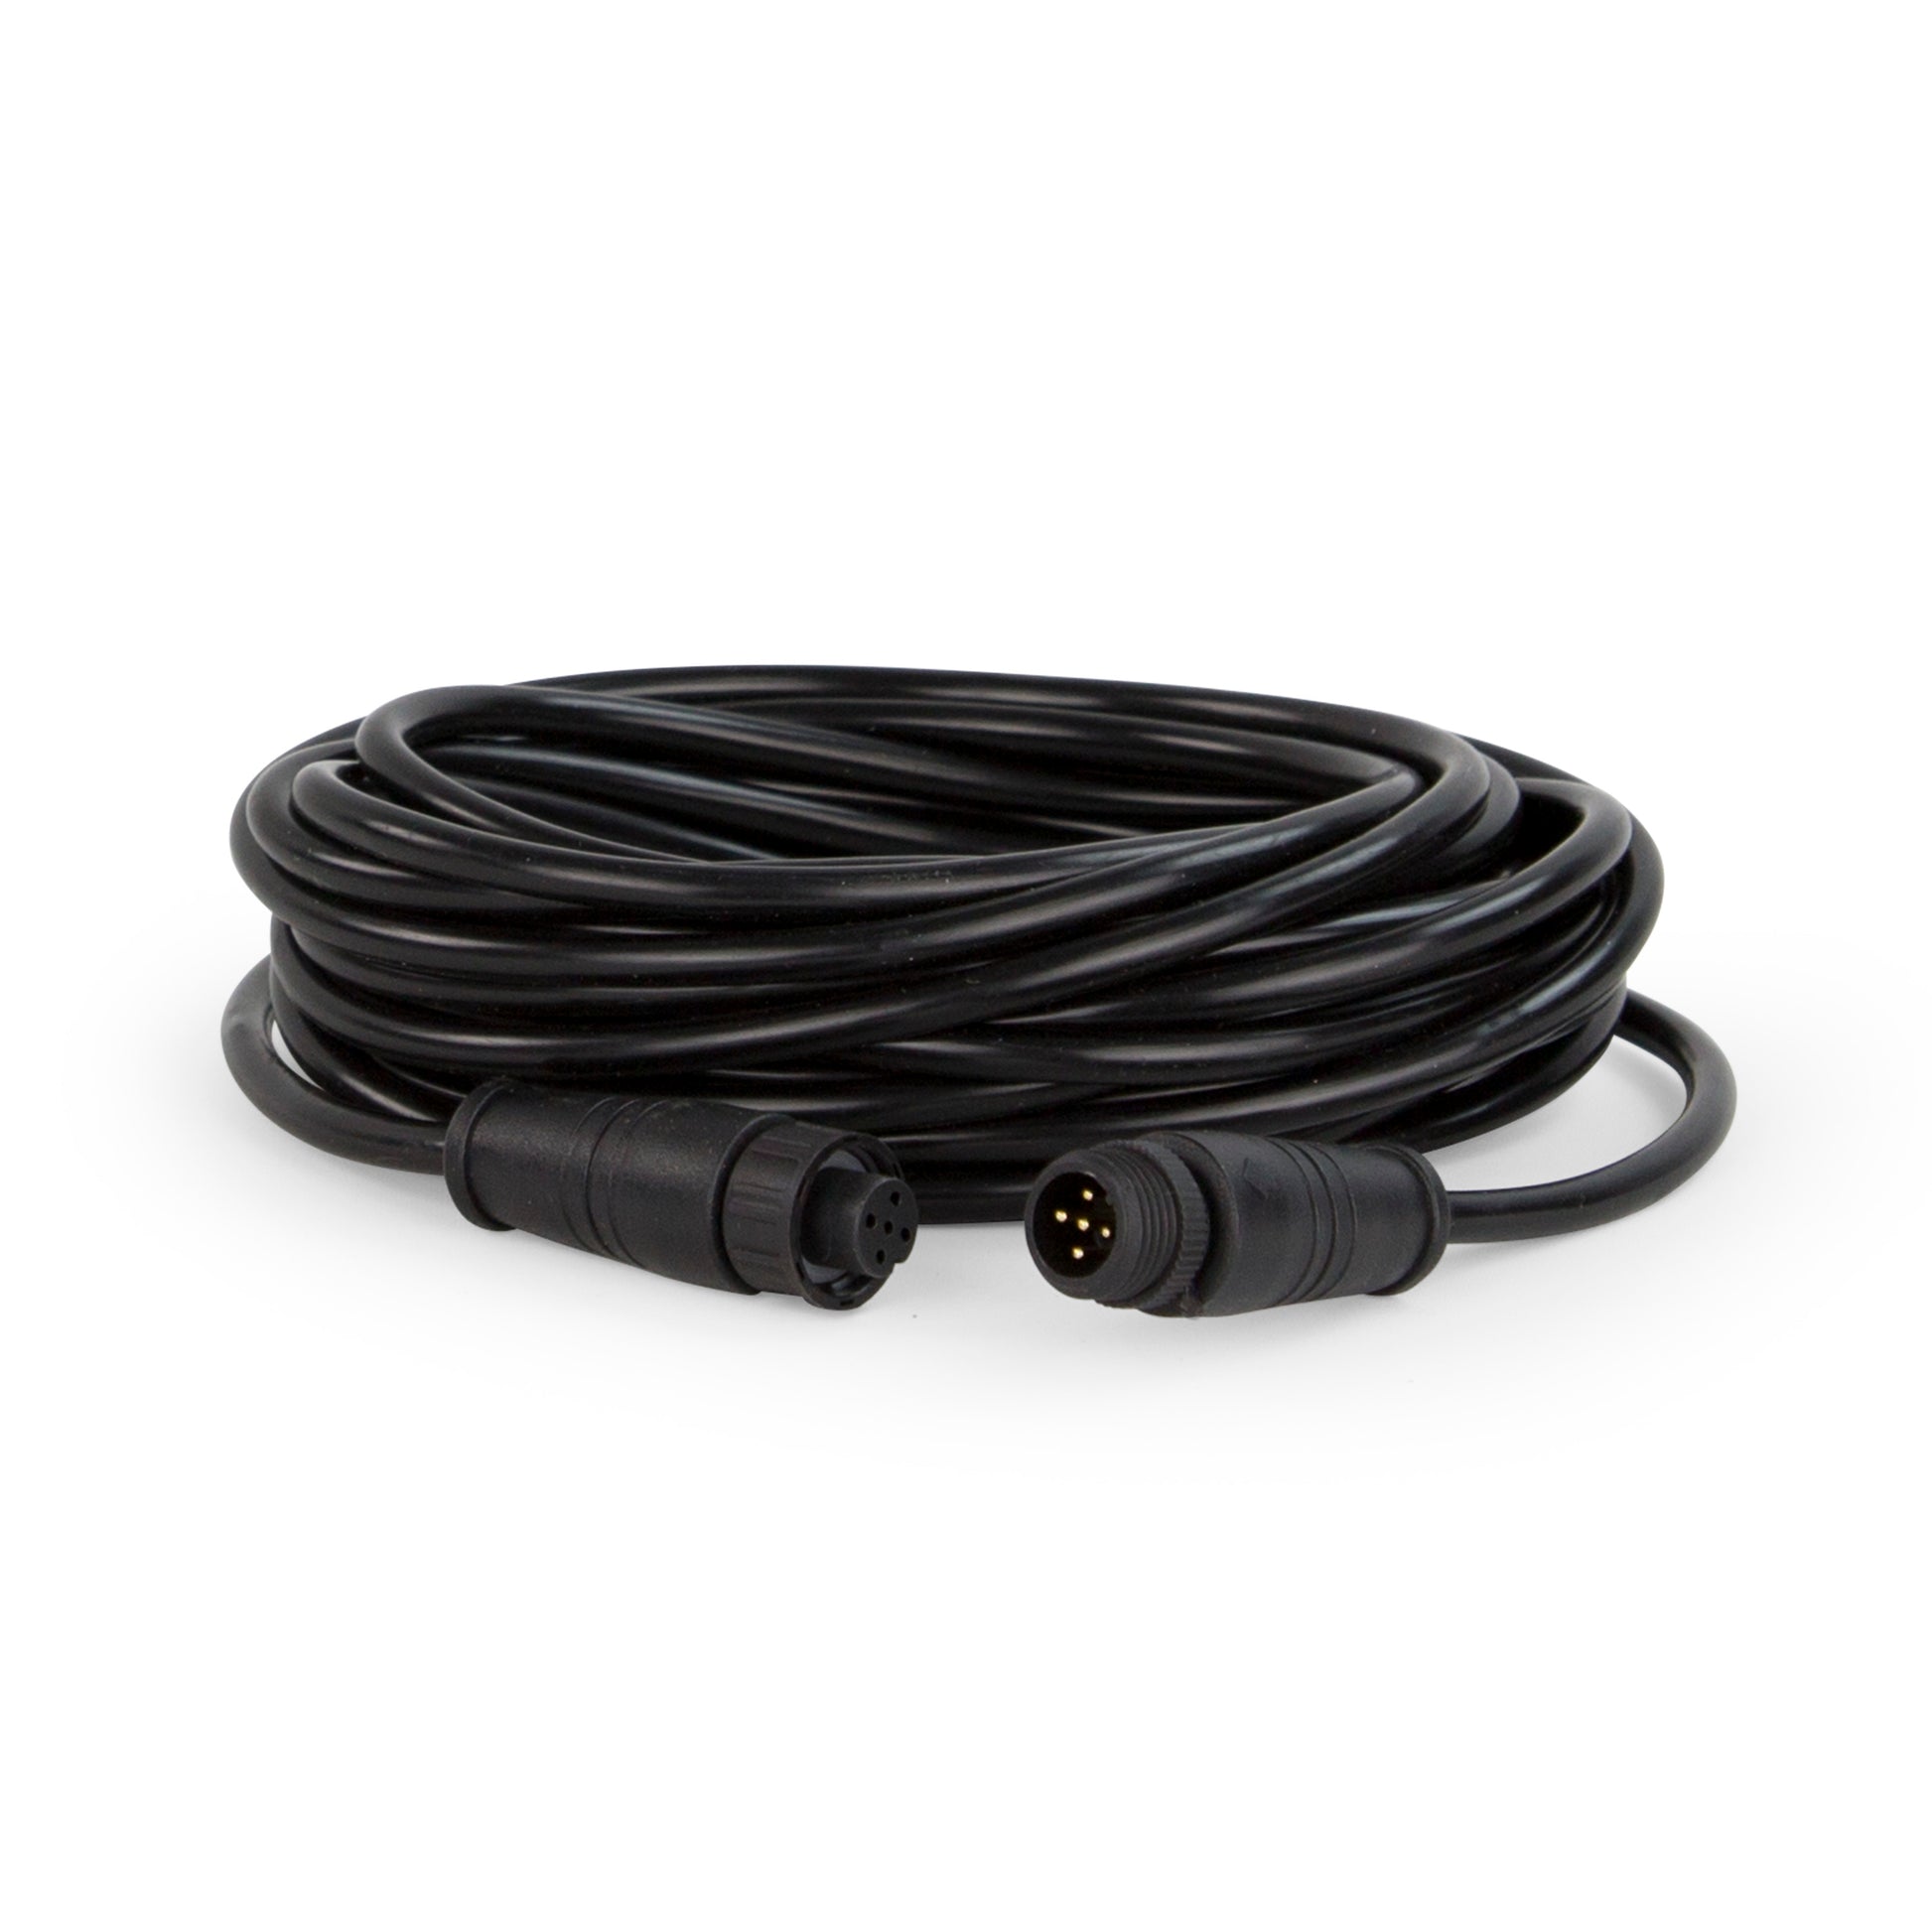 LED EXTENSION CABLE - 7.5m - COLOUR-CHANGING LIGHTING - UK - WaterFeature.Shop